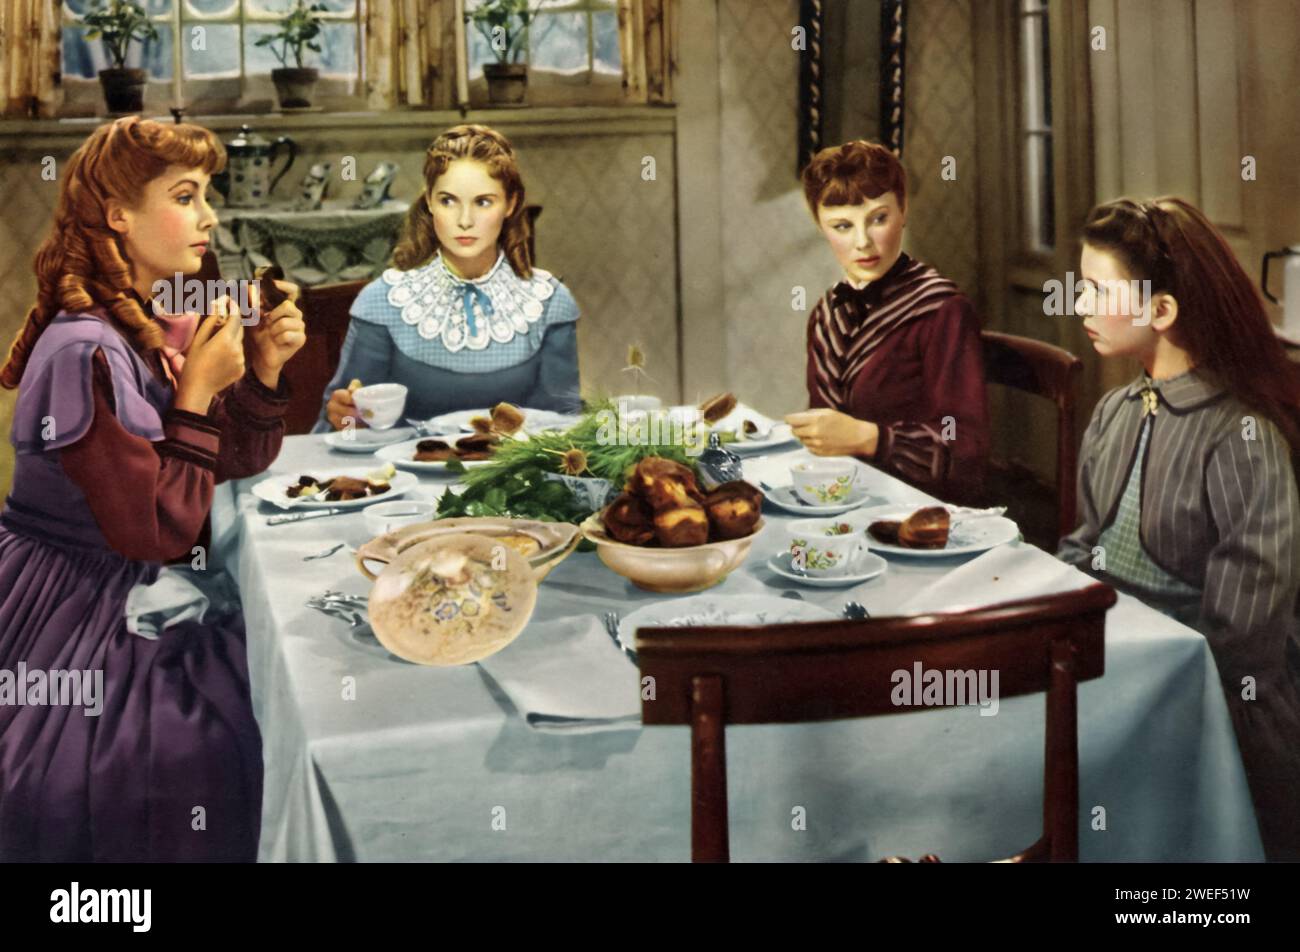 Elizabeth Taylor, Janet Leigh, June Allyson, and Margaret O'Brien star in the film adaptation of 'Little Women' (1949), based on Louisa May Alcott's beloved novel. In this classic, Allyson portrays the spirited Jo March, Leigh is the gentle Meg, Taylor shines as the charming Amy, and O'Brien plays the sweet Beth. The film captures the warmth and trials of the March sisters as they grow up during the American Civil War. Stock Photo